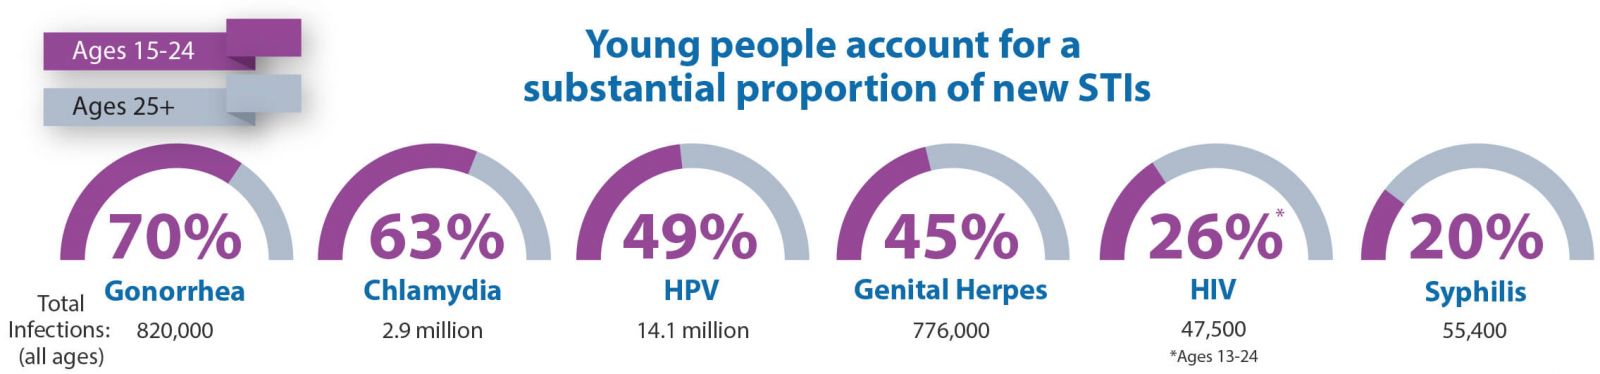 proportion of STIs among young people 